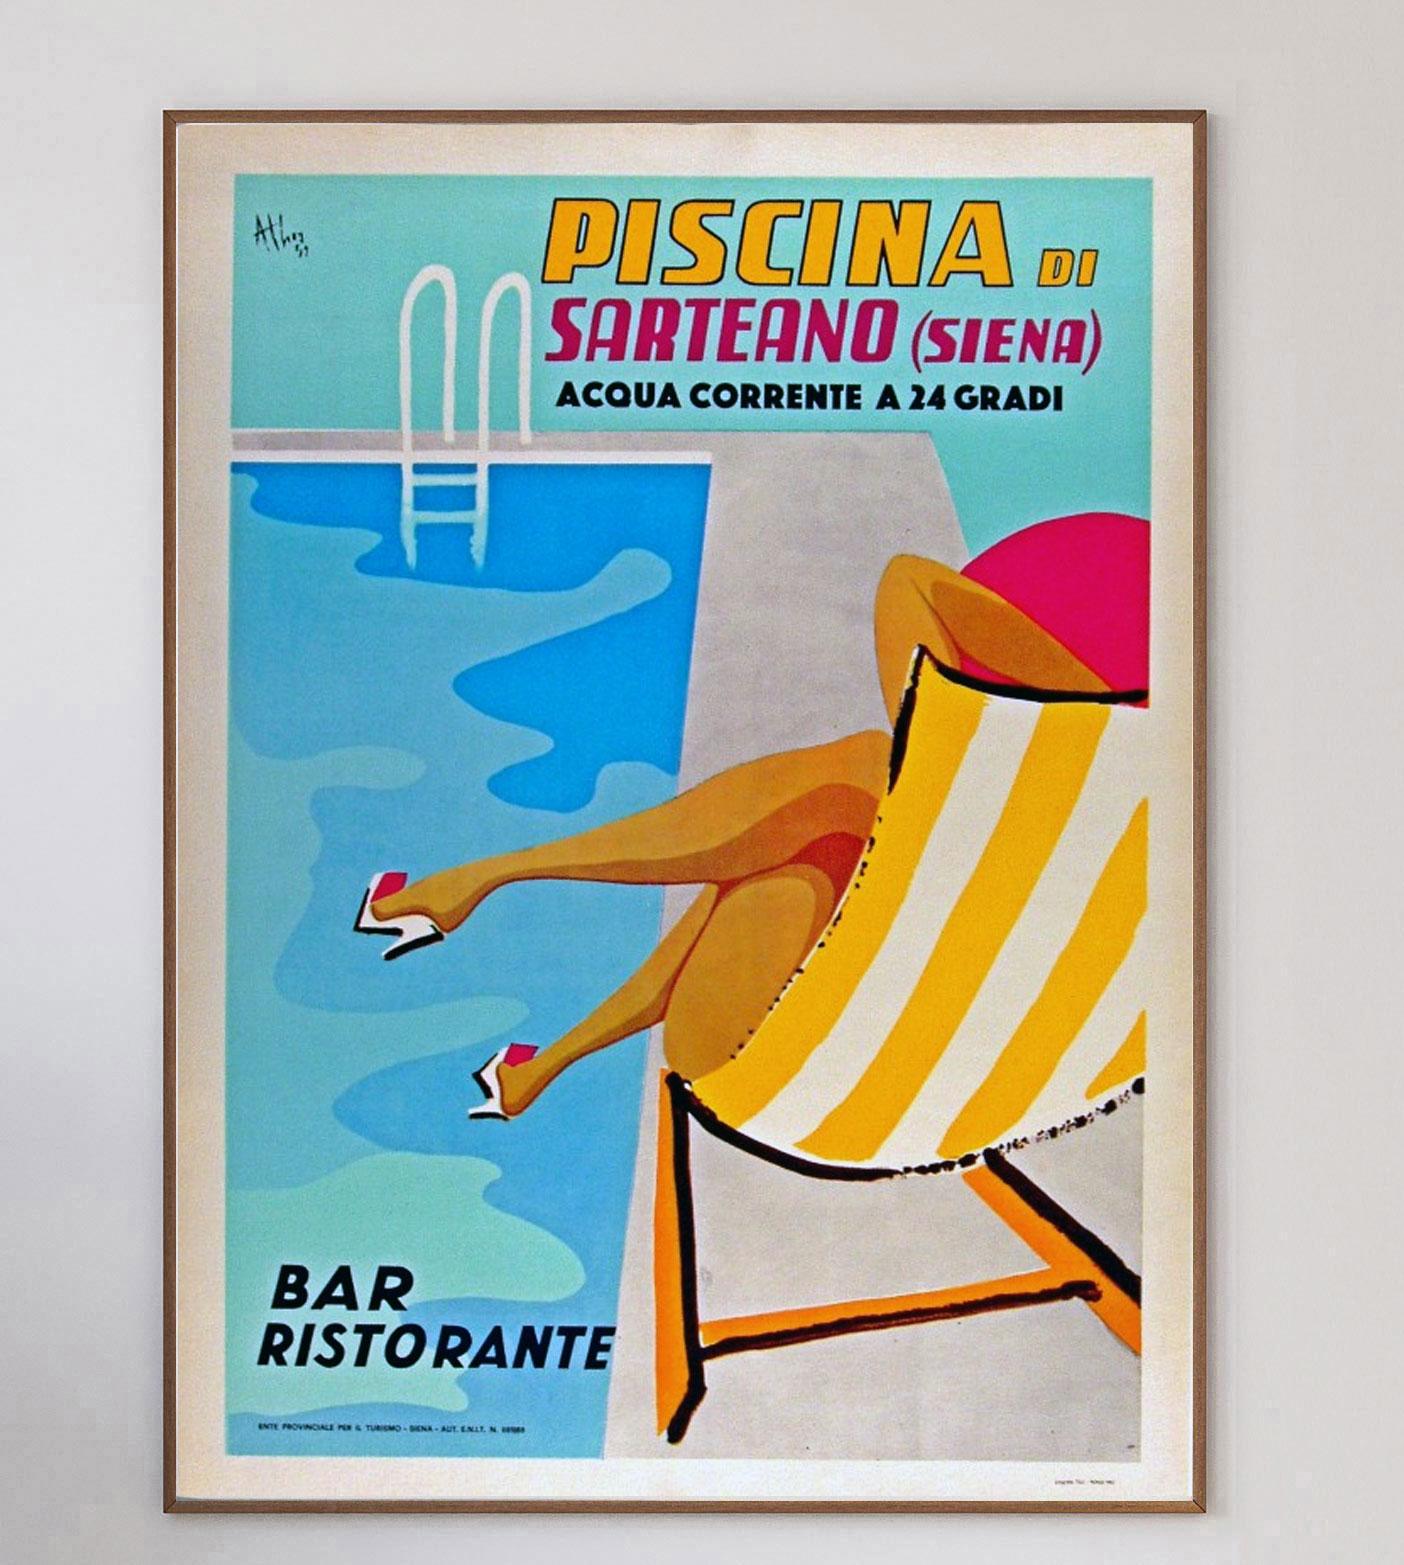 A stunning poster designed by Athoy in 1962 to advertise a public POOL in Sarteano, Sienna in Italy. The gorgeous midcentury artwork transports you to the early 60s era bathed in sunshine. The poster is in mint condition, backed with museum quality